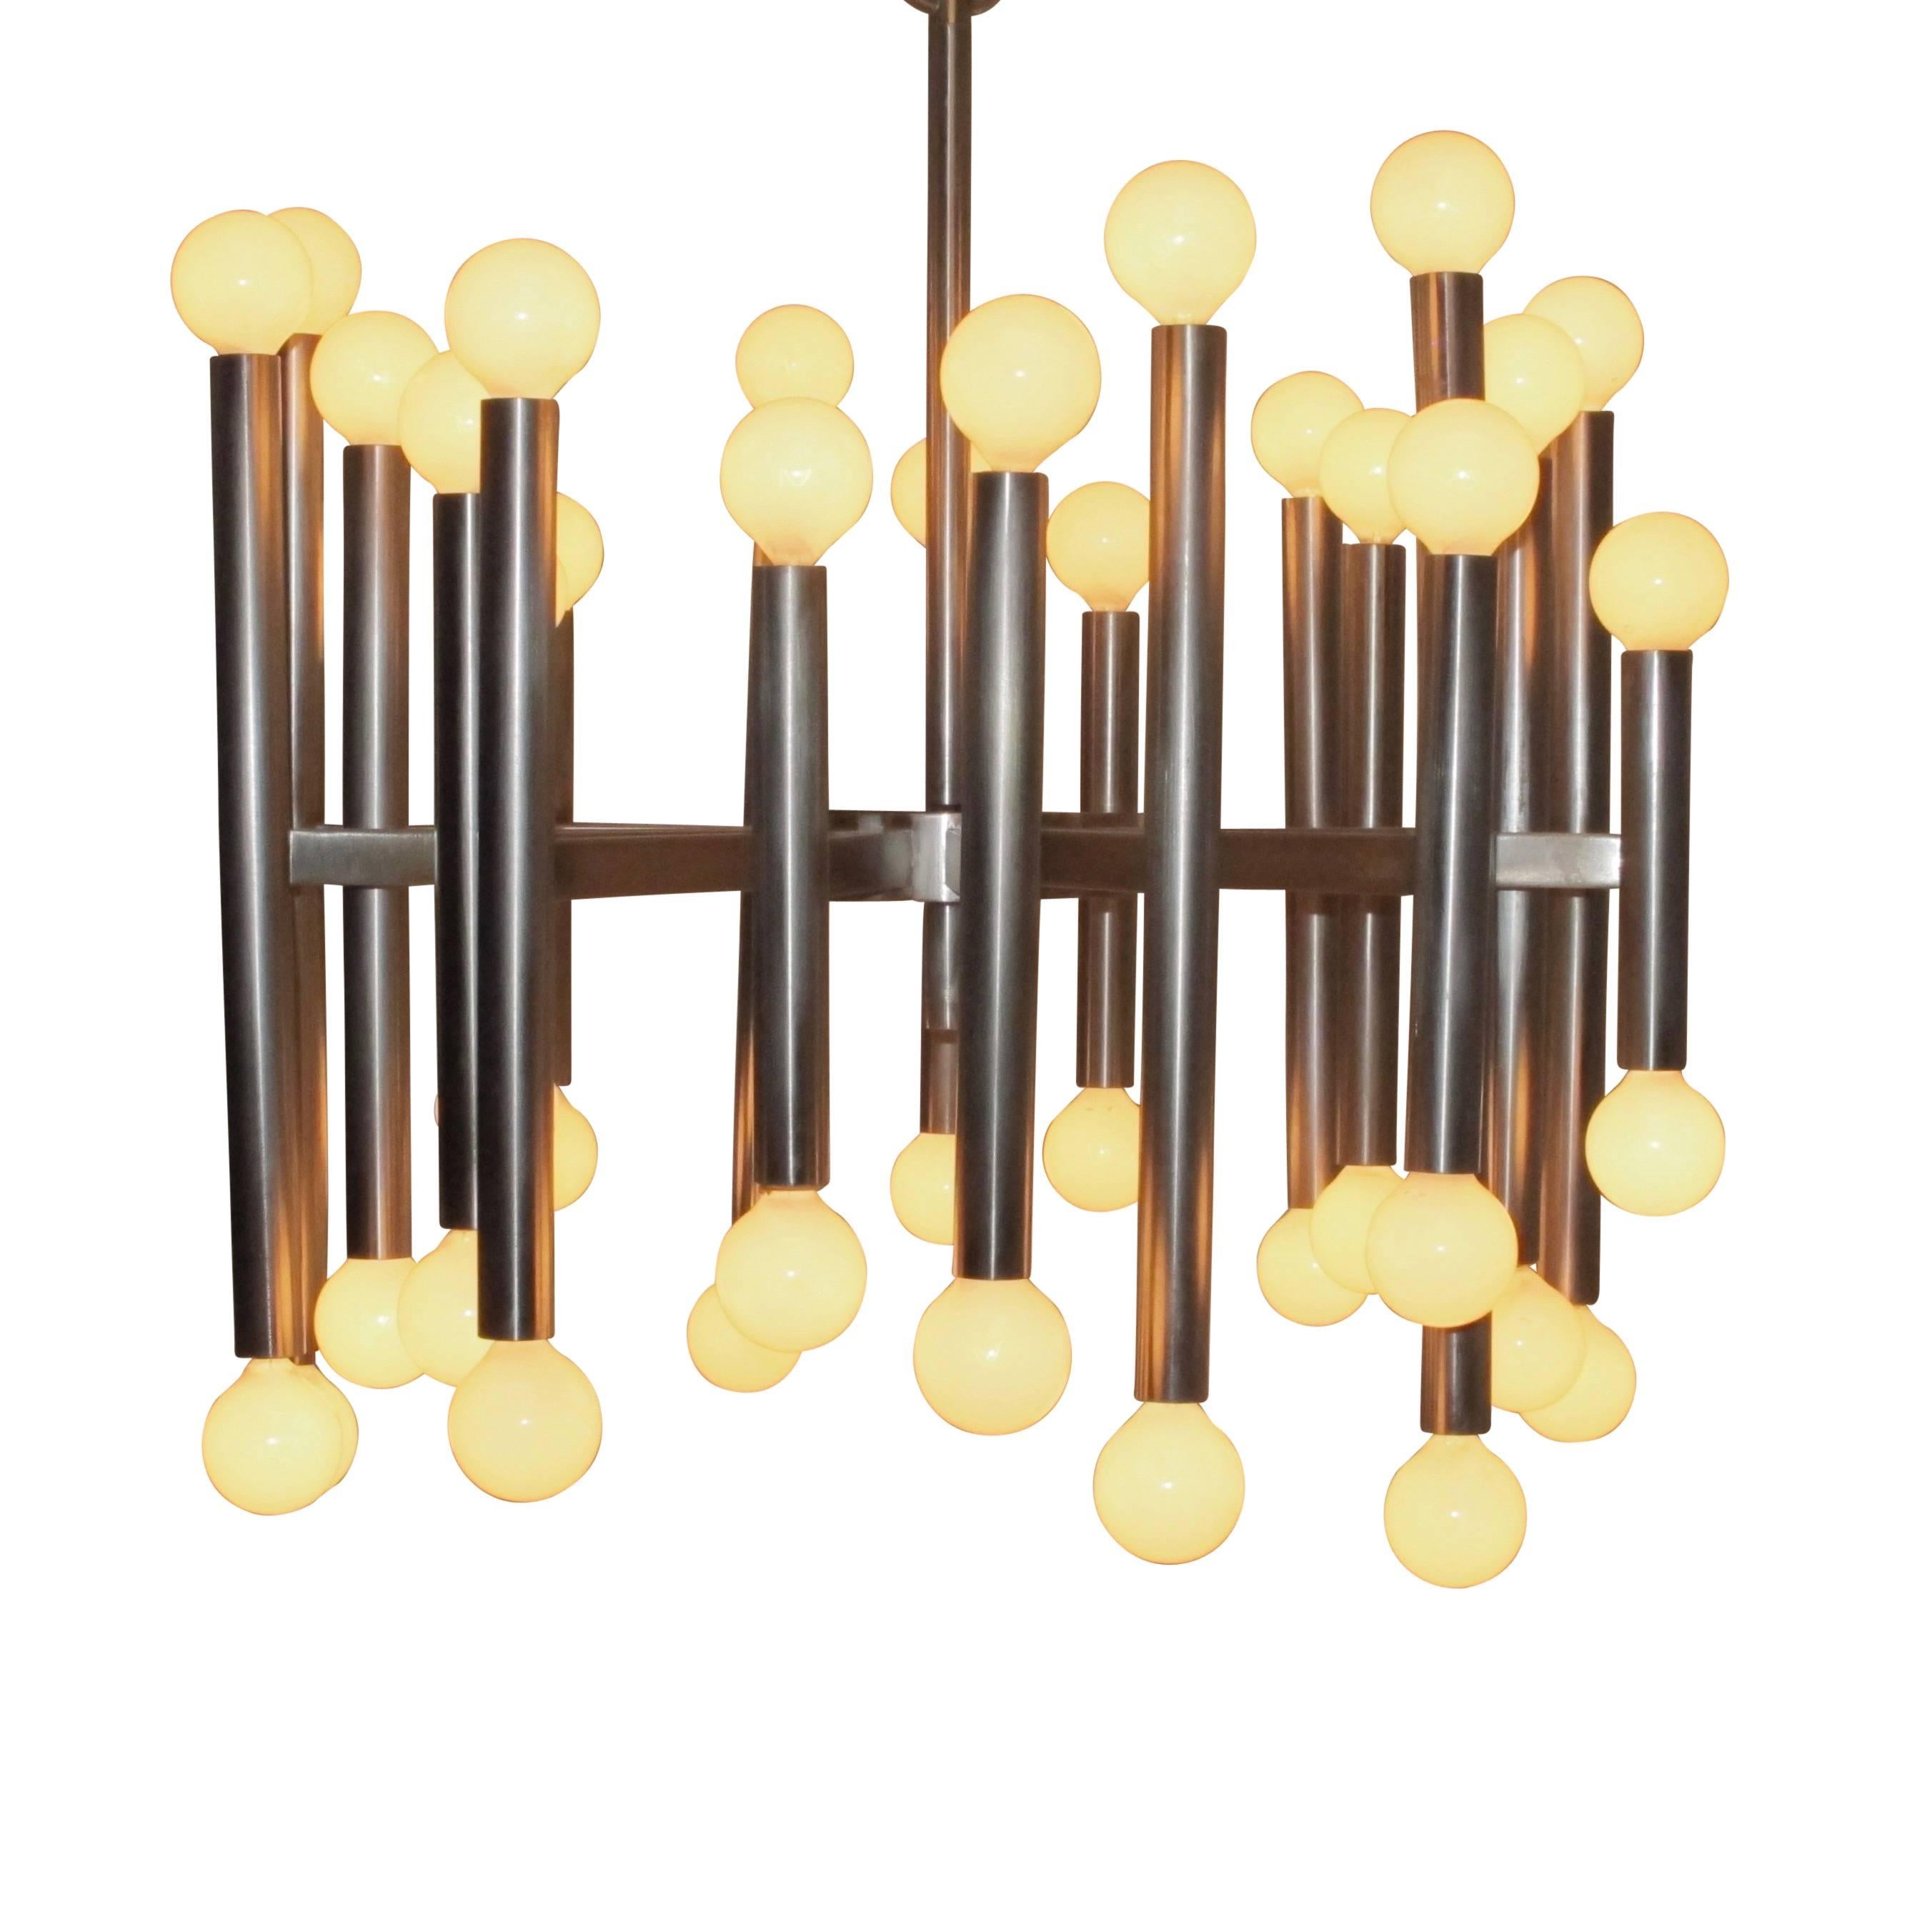 Gaetano Sciolari Brushed Stainless Steel Light Fixture, Italian Mid-20th Century In Excellent Condition For Sale In San Francisco, CA